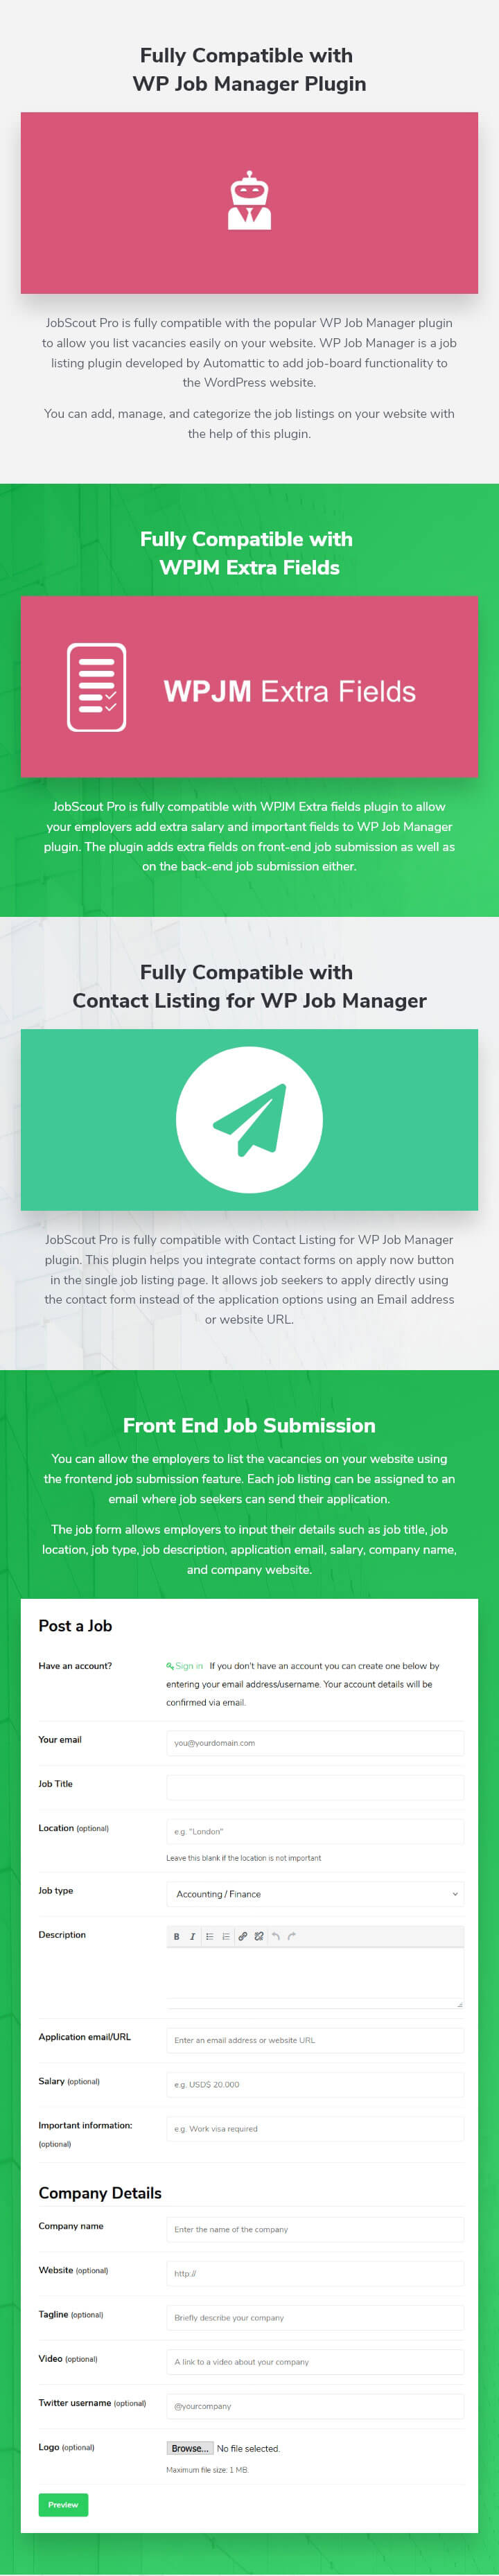 features of JobScout WordPress Theme